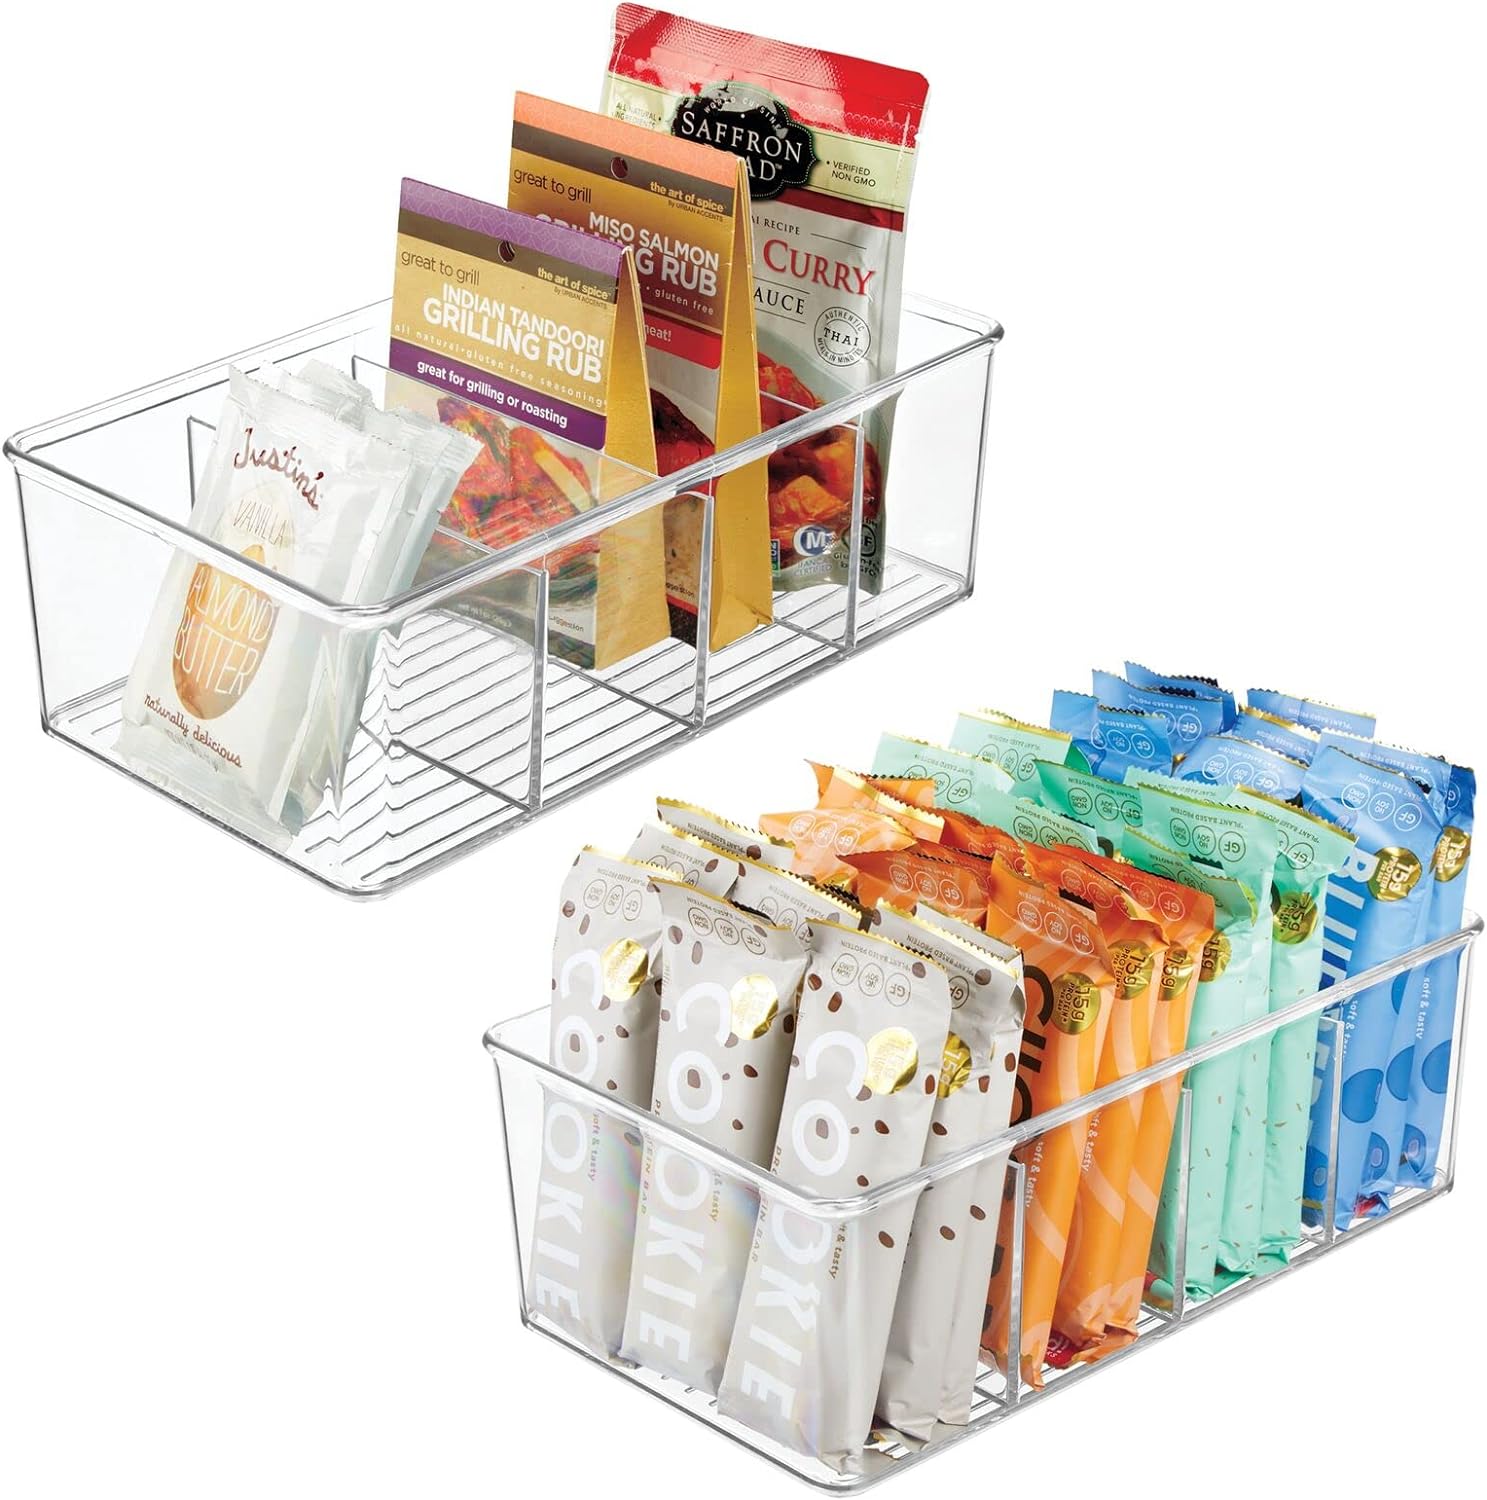 mDesign Plastic 4-Section Divided Organizer Bins - Storage for Cabinet, Pantry, Fridge or Home Organization - Holds Snacks, Granola Bars or Seasoning and Spice Packets, Ligne Collection, 2 Pack, Clear